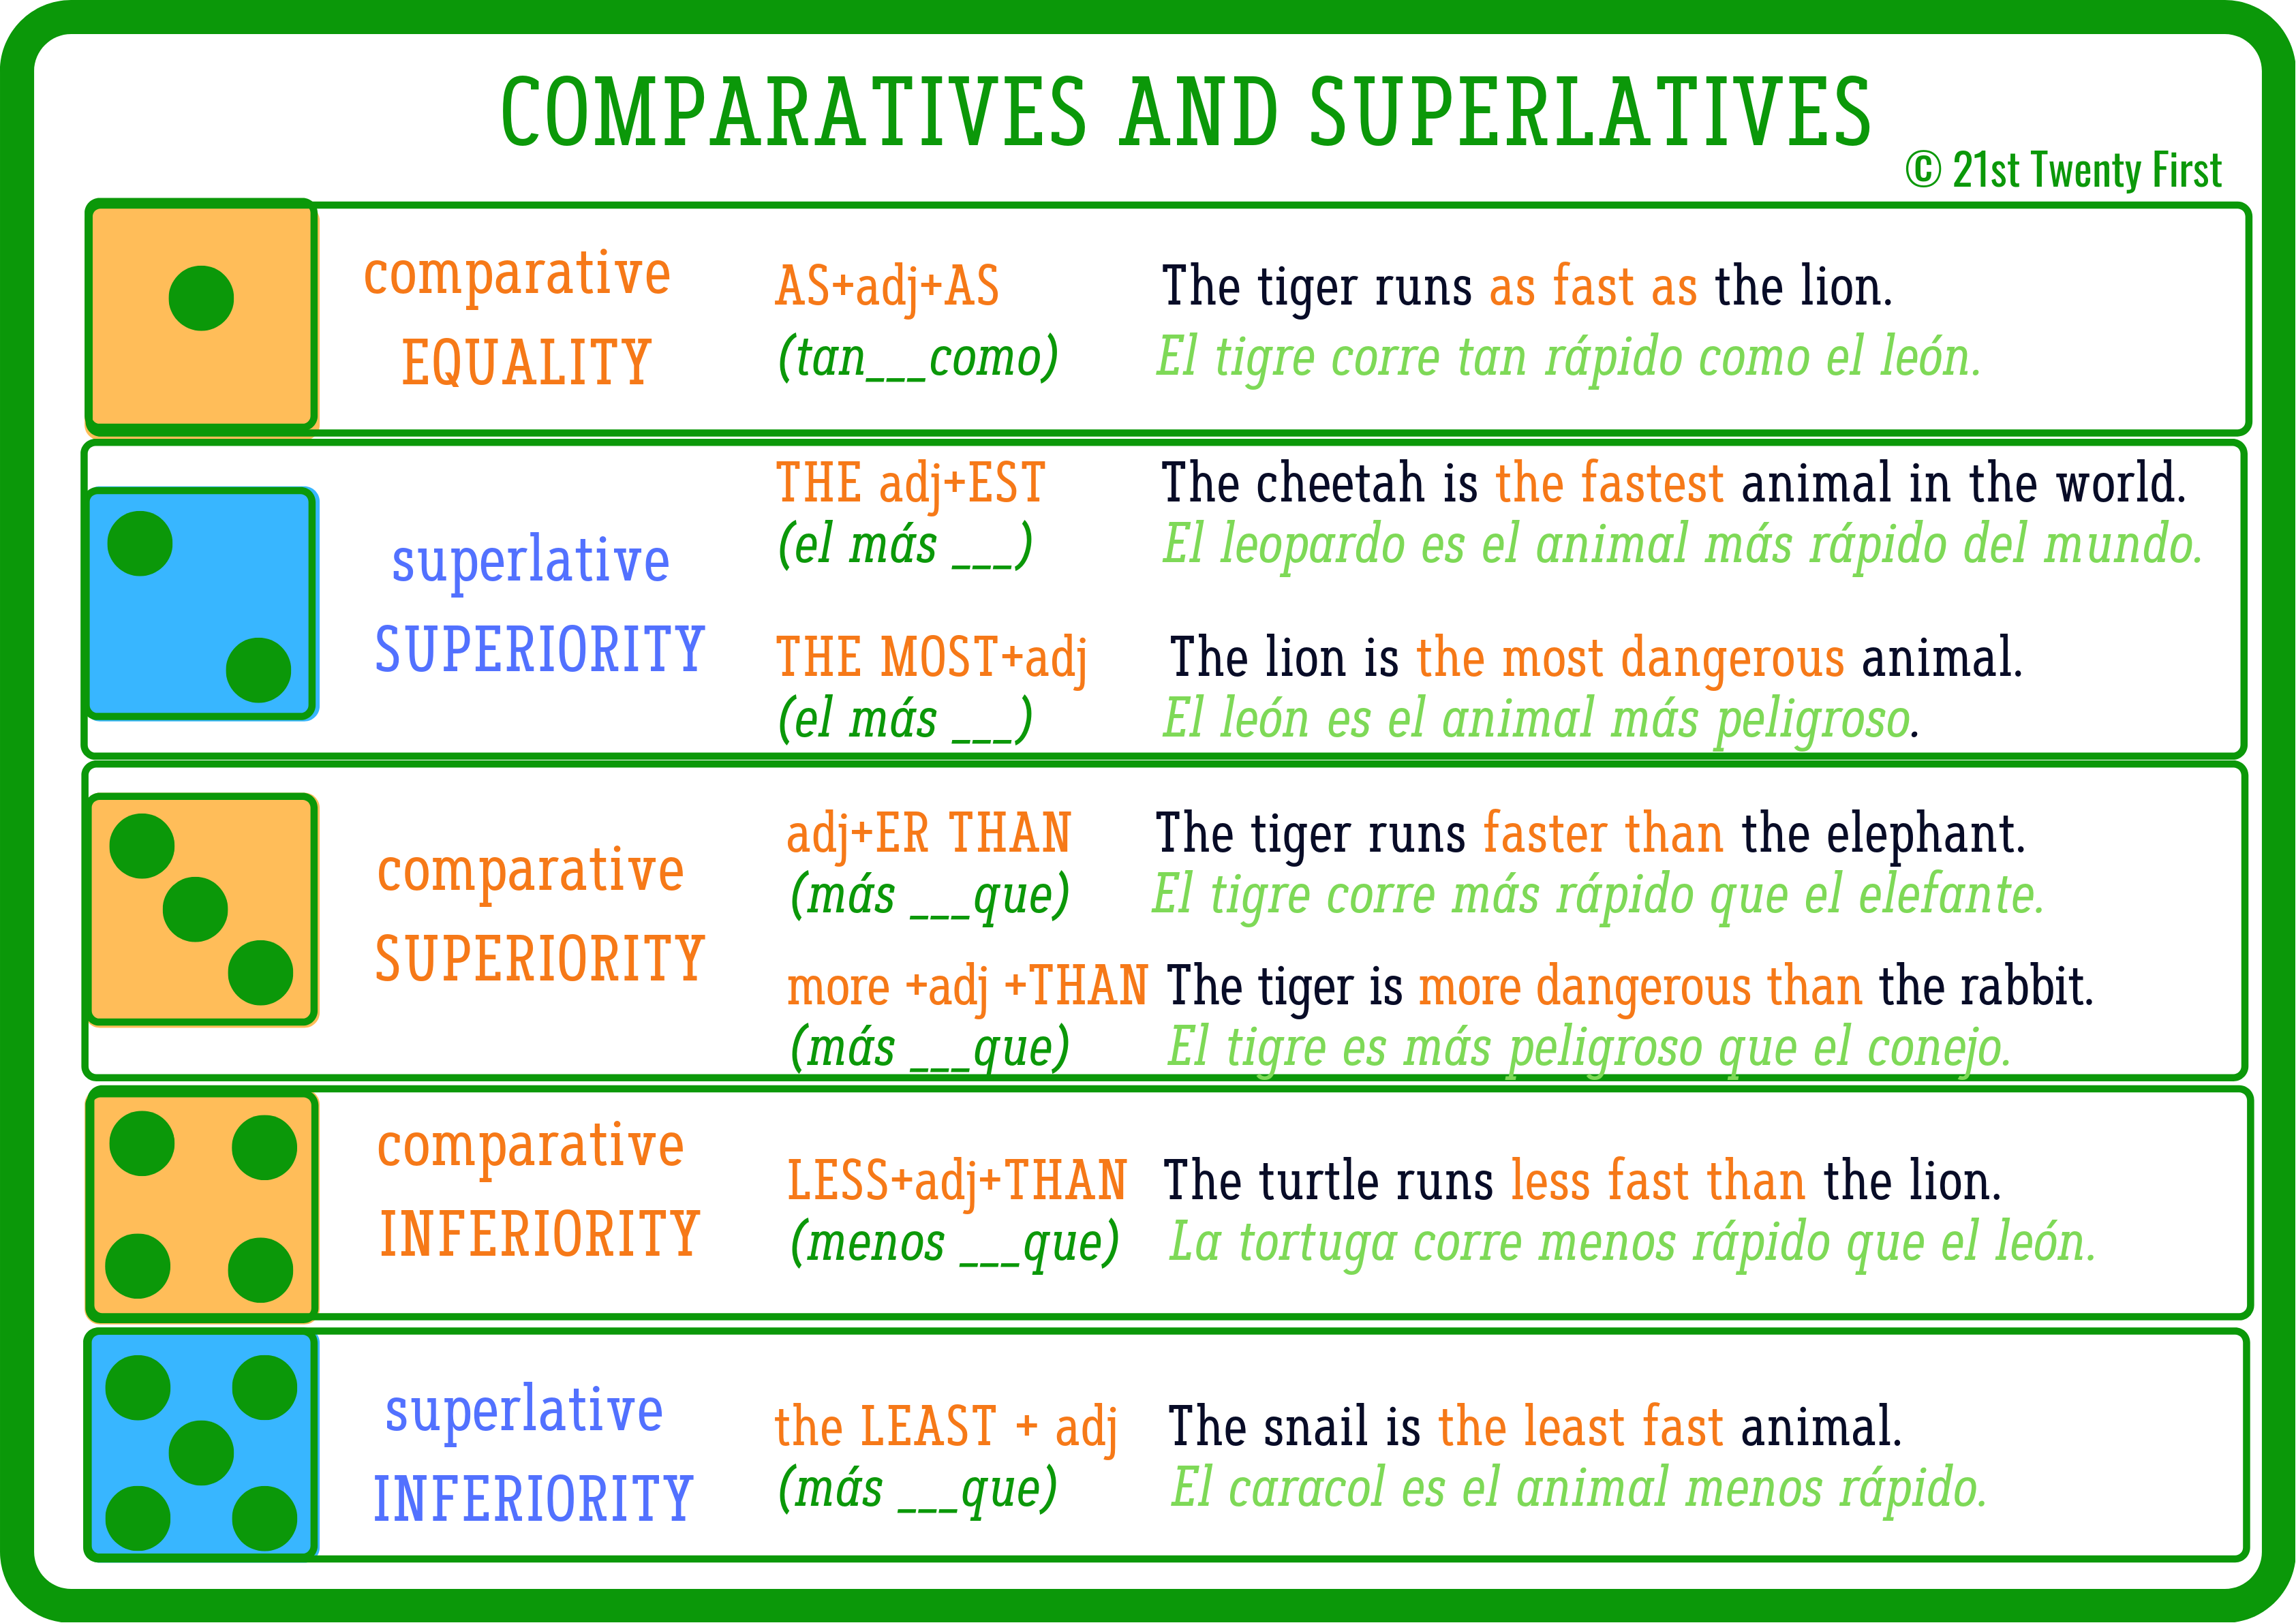 Young comparative and superlative. Comparatives and Superlatives исключения. Comparatives and Superlatives правило. Less Comparative and Superlative. Fast Comparative and Superlative.